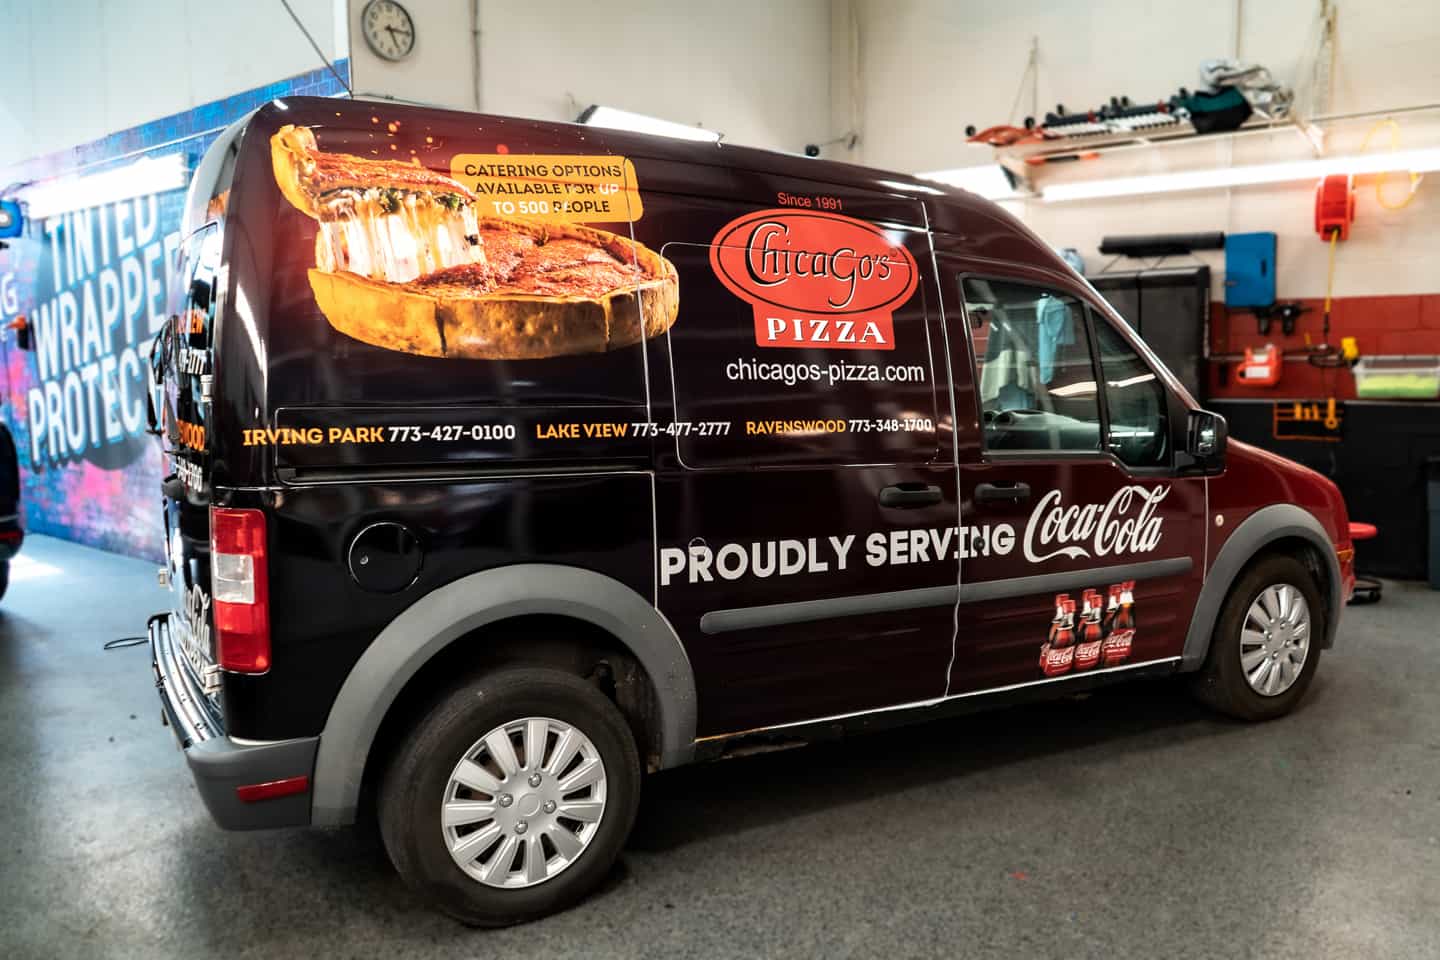 Van Branding: Use Your Vehicle to Effortlessly Promote Your Business